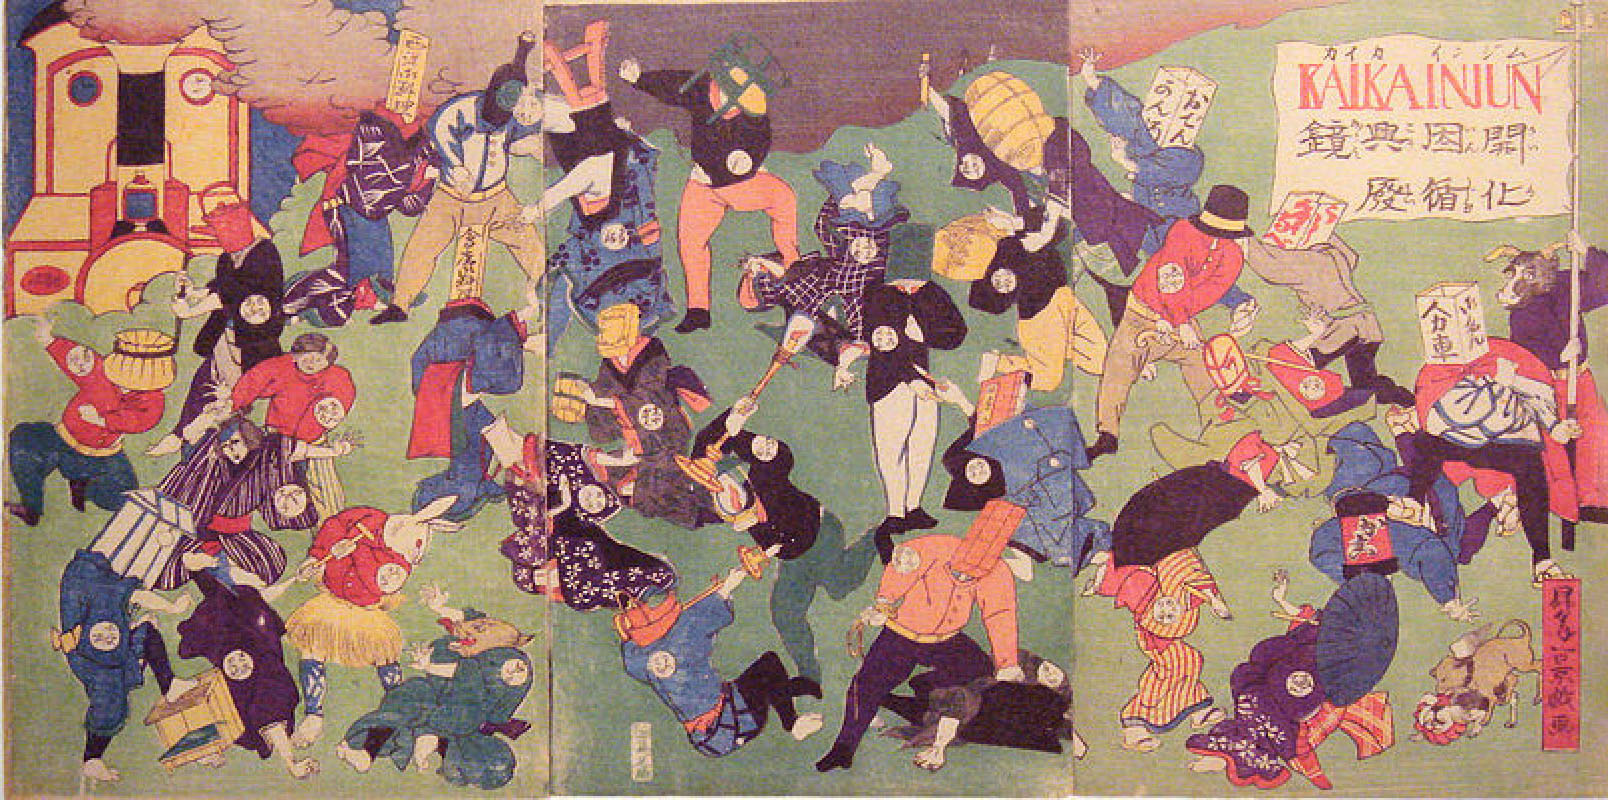 This image shows Japanese people in traditional clothing fighting western objects including electric lamps and chairs.